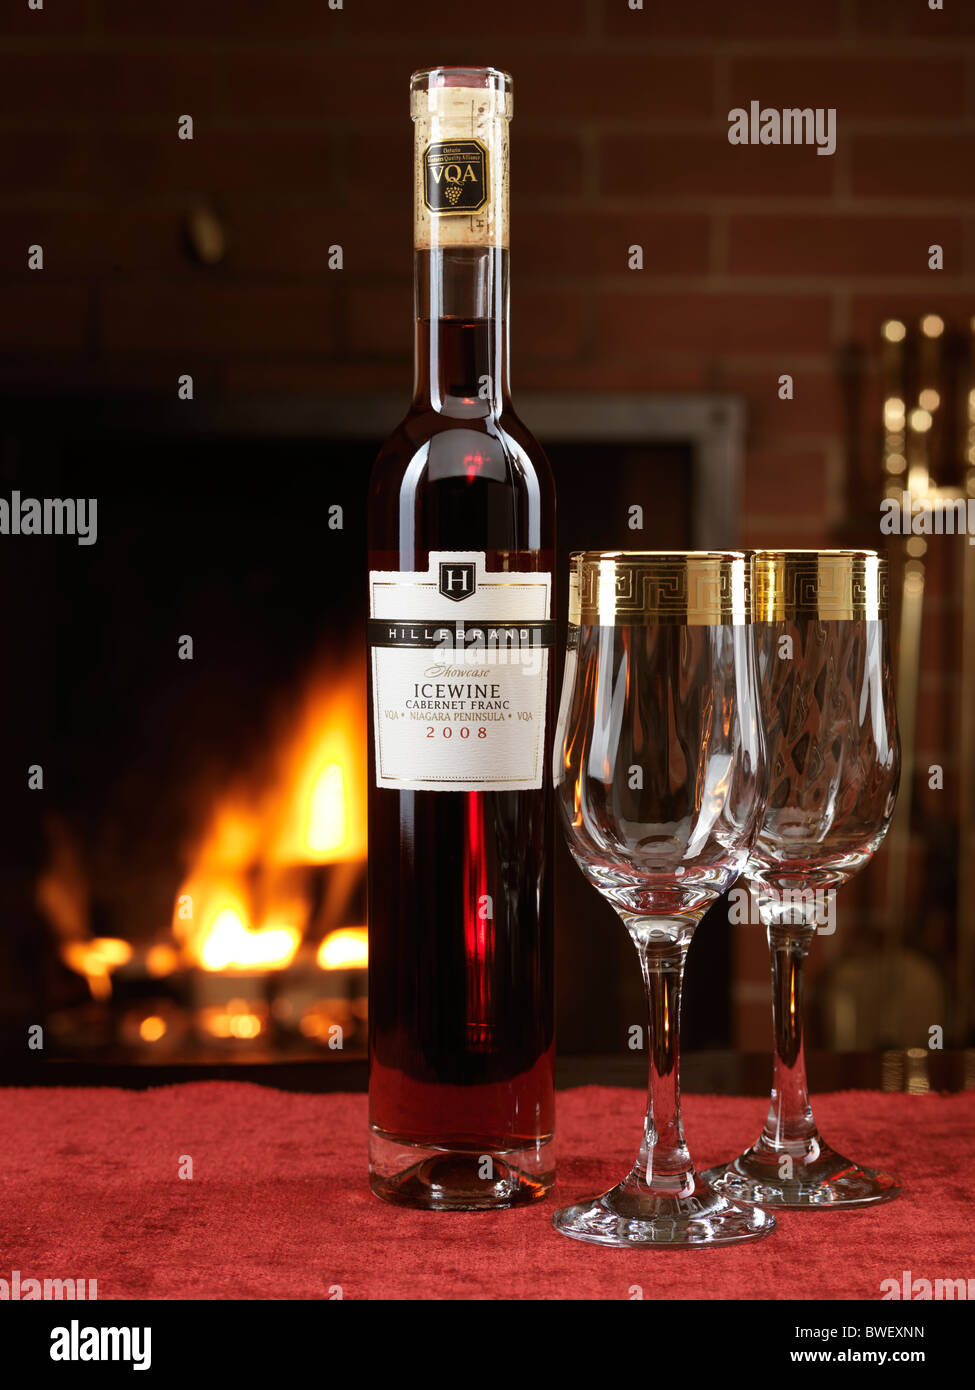 Bottle of red Icewine Cabernet Franc by Hillebrand and two wine glasses on a table with a fireplace in the background Stock Photo